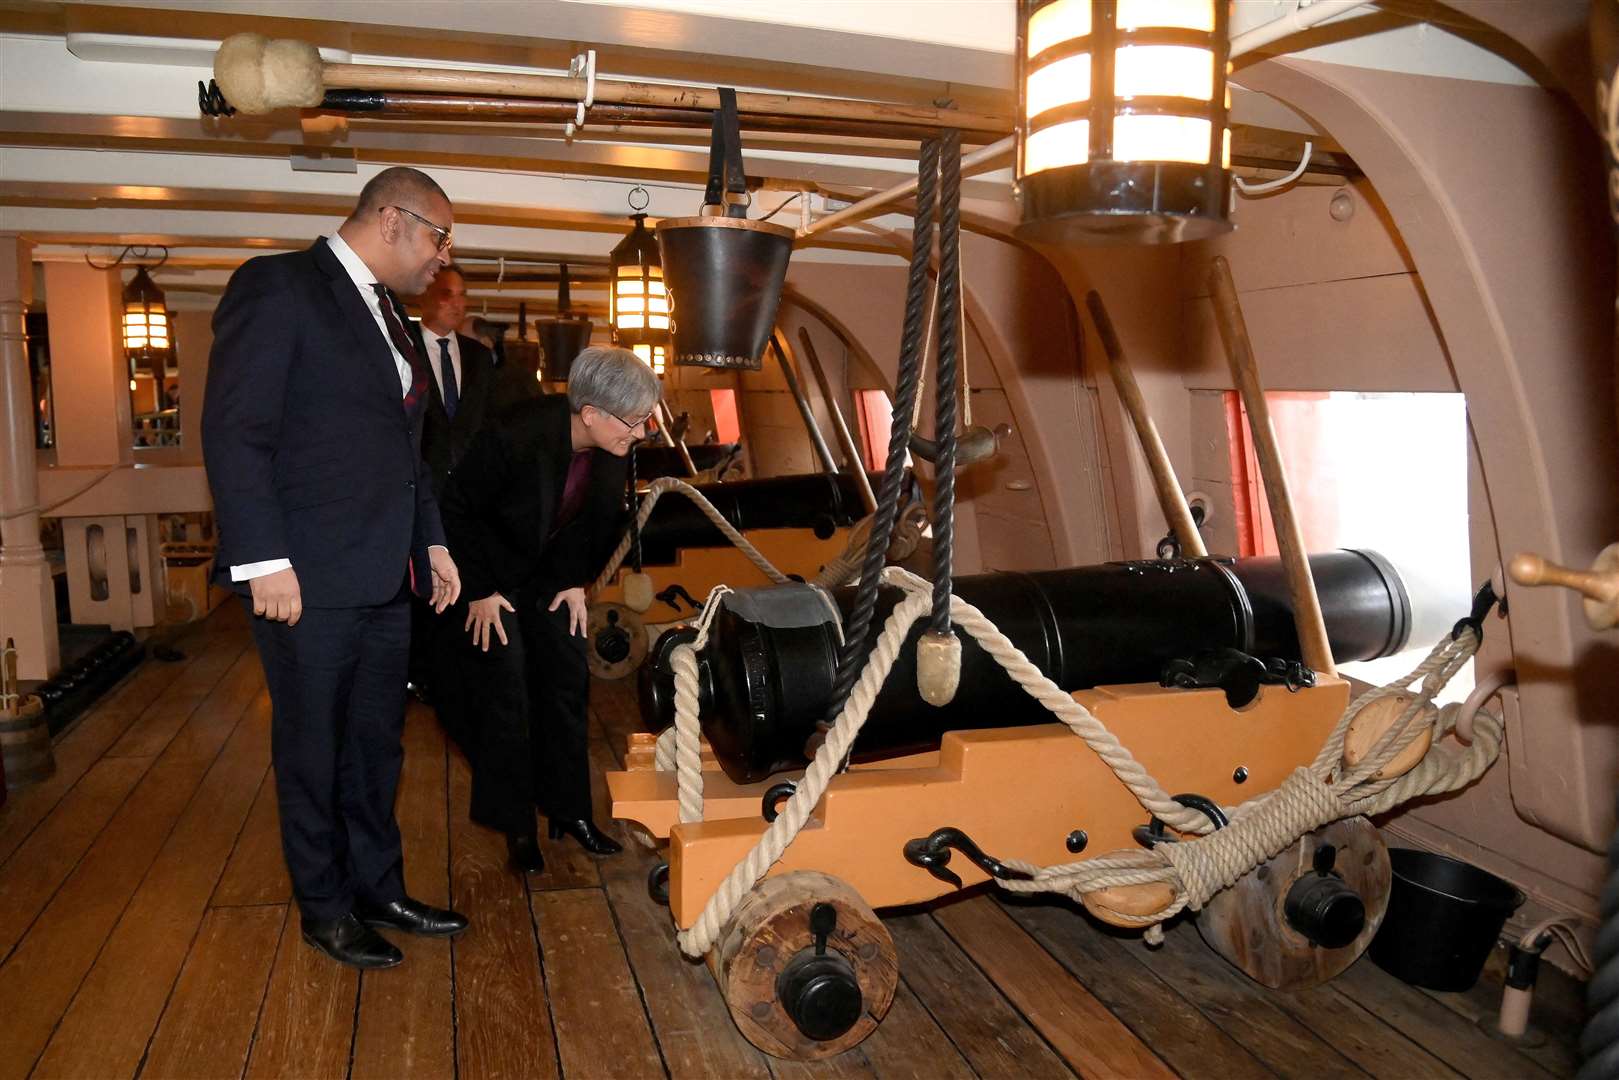 Foreign Secretary James Cleverly and Australian Minister for Foreign Affairs Senator Penny Wong view a cannon on the gun deck of HMS Victory in Portsmouth (Toby Melville/PA)